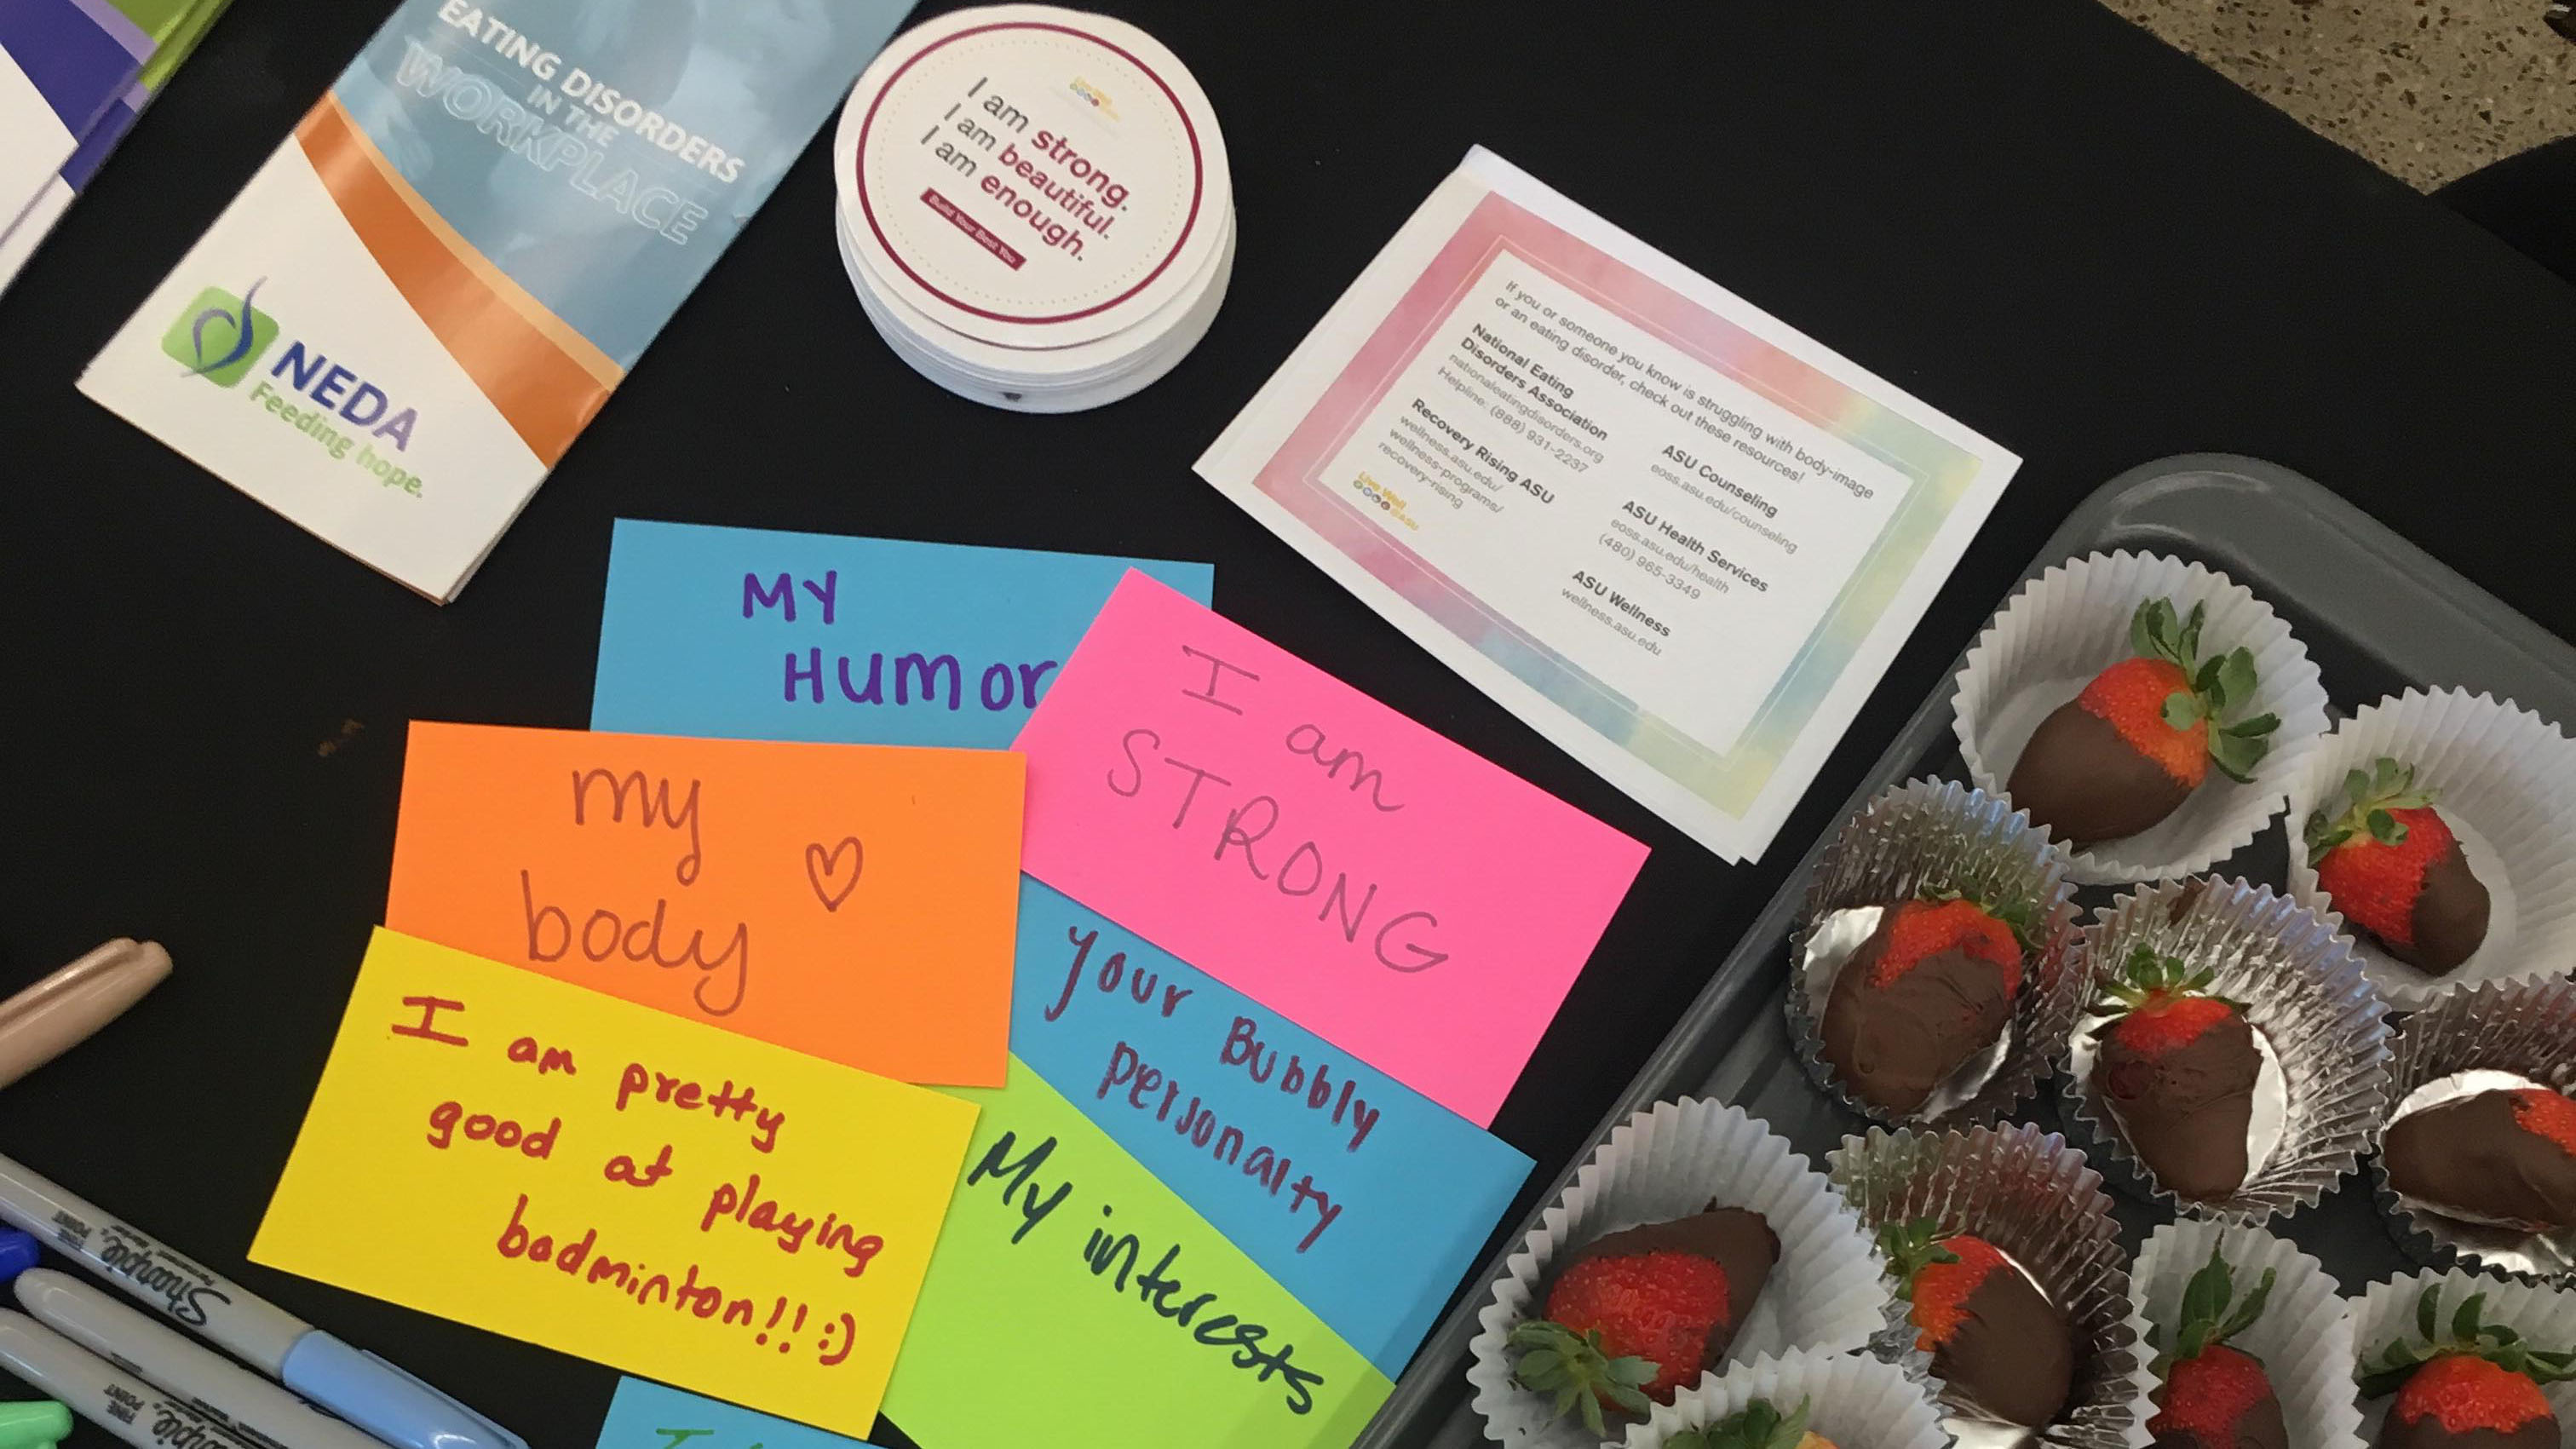 Affirming messages written on post-it notes such as "i am enough" for an ASU event about eating disorder awareness